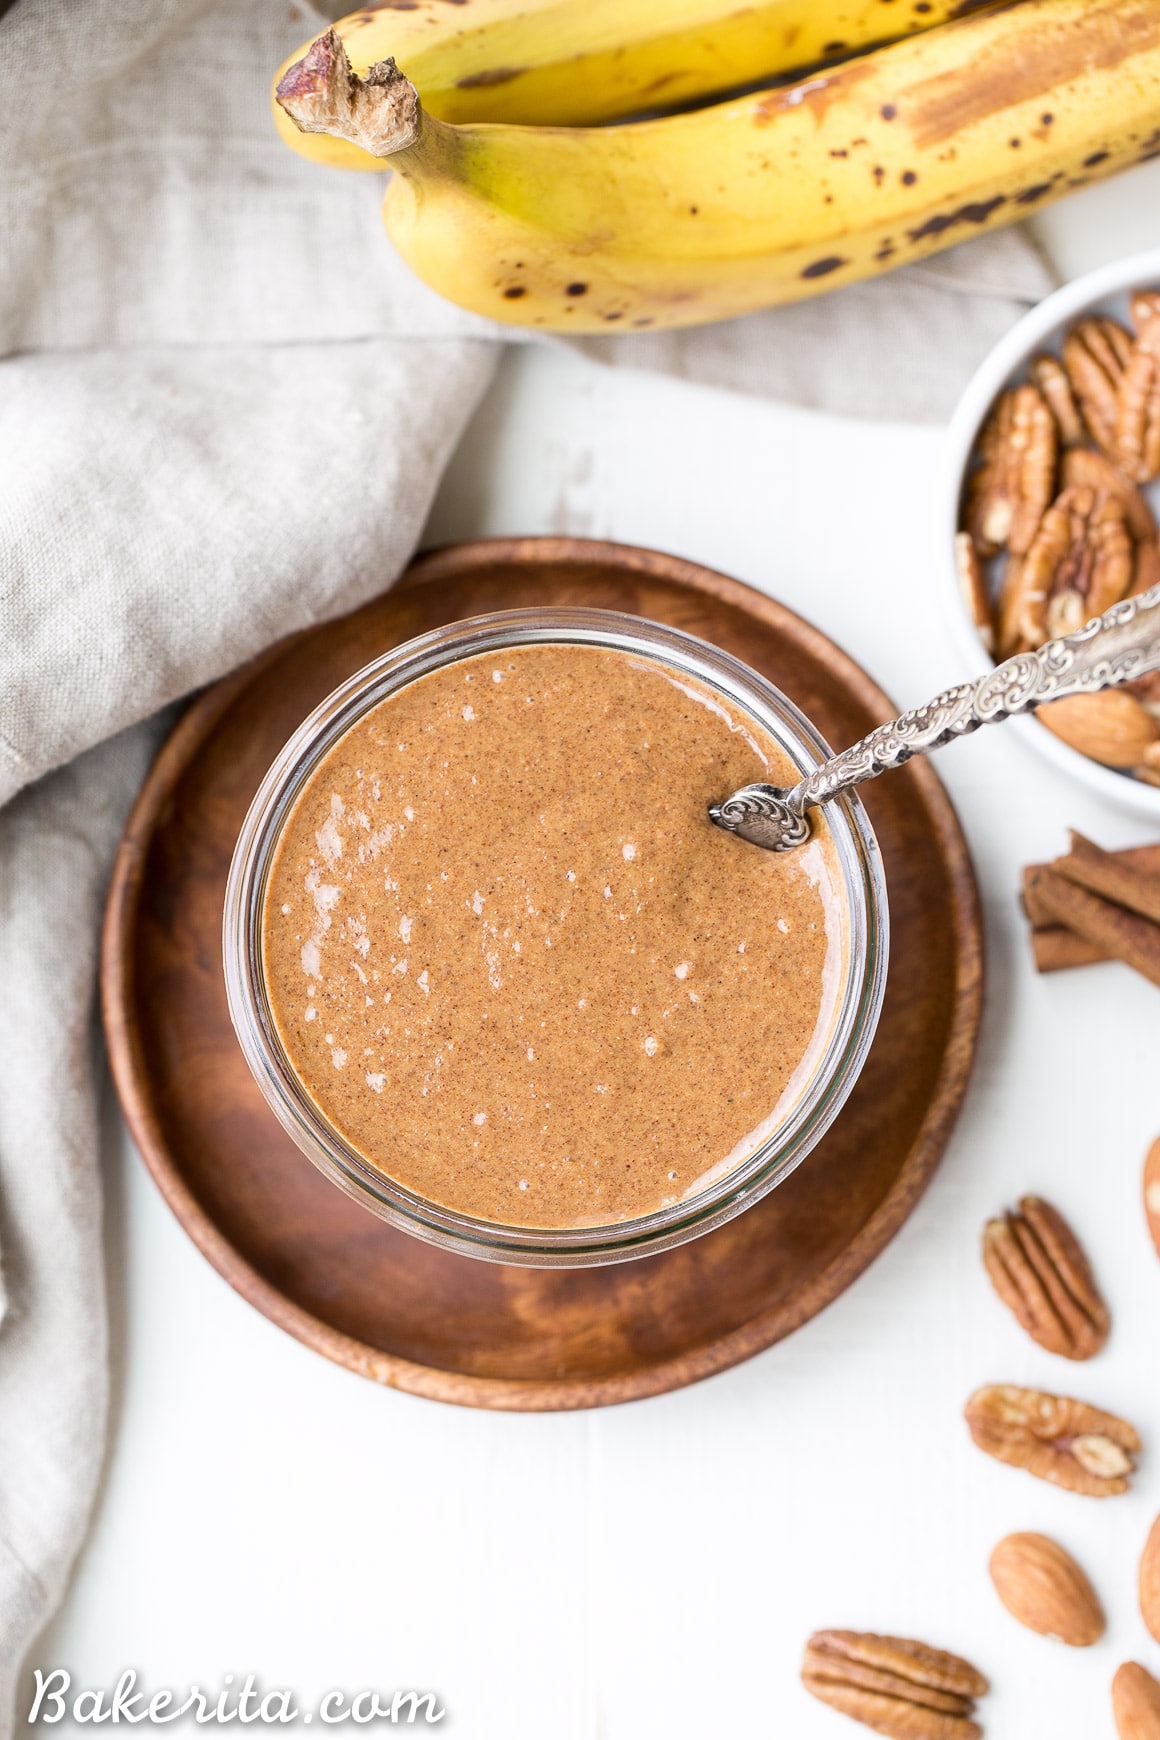 You'll want to spread this Banana Bread Pecan Almond Butter on everything! This creamy nut butter, made from pecans and almonds, tastes like a spreadable version of banana bread, loaded with cinnamon, nutmeg, and dried banana bits. There's no sugar added in this vegan, Paleo, + Whole30-approved treat.